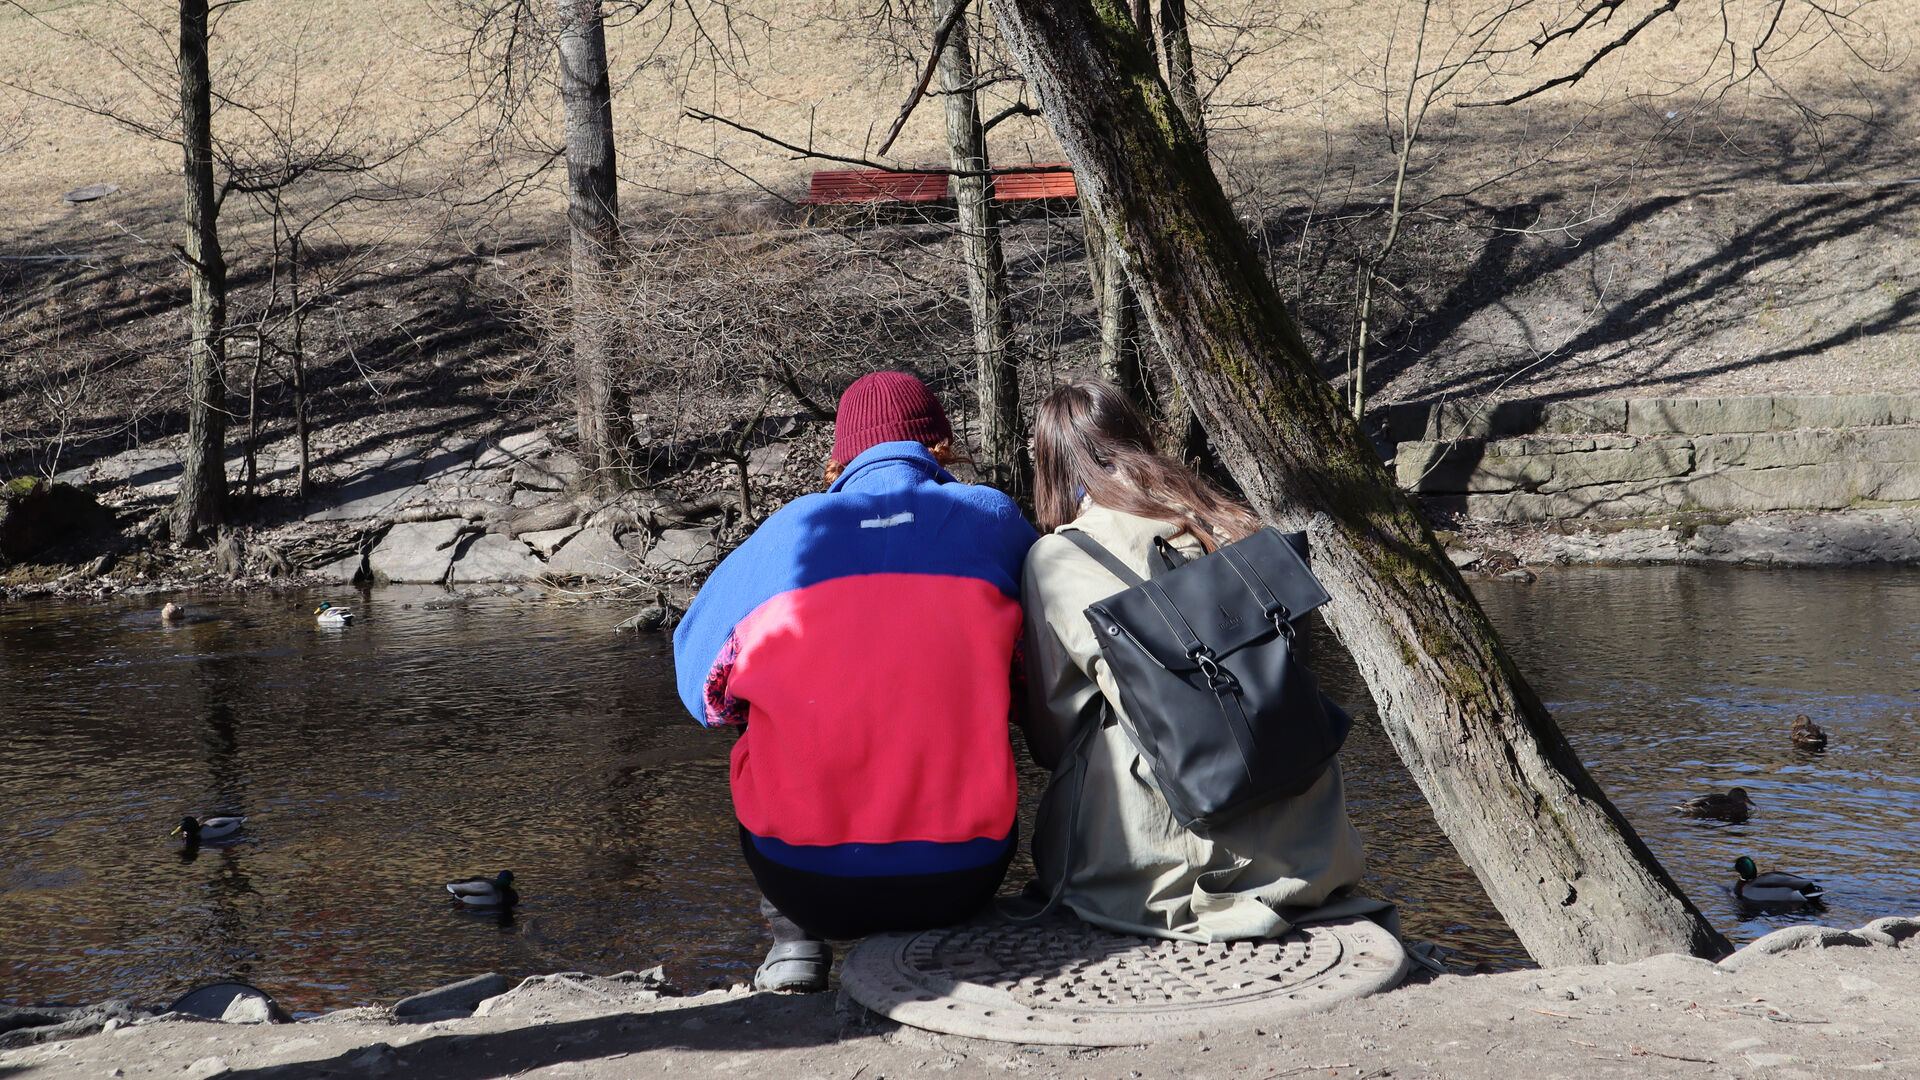 Students sitting by the Akerselva river side. Bare trees in the background